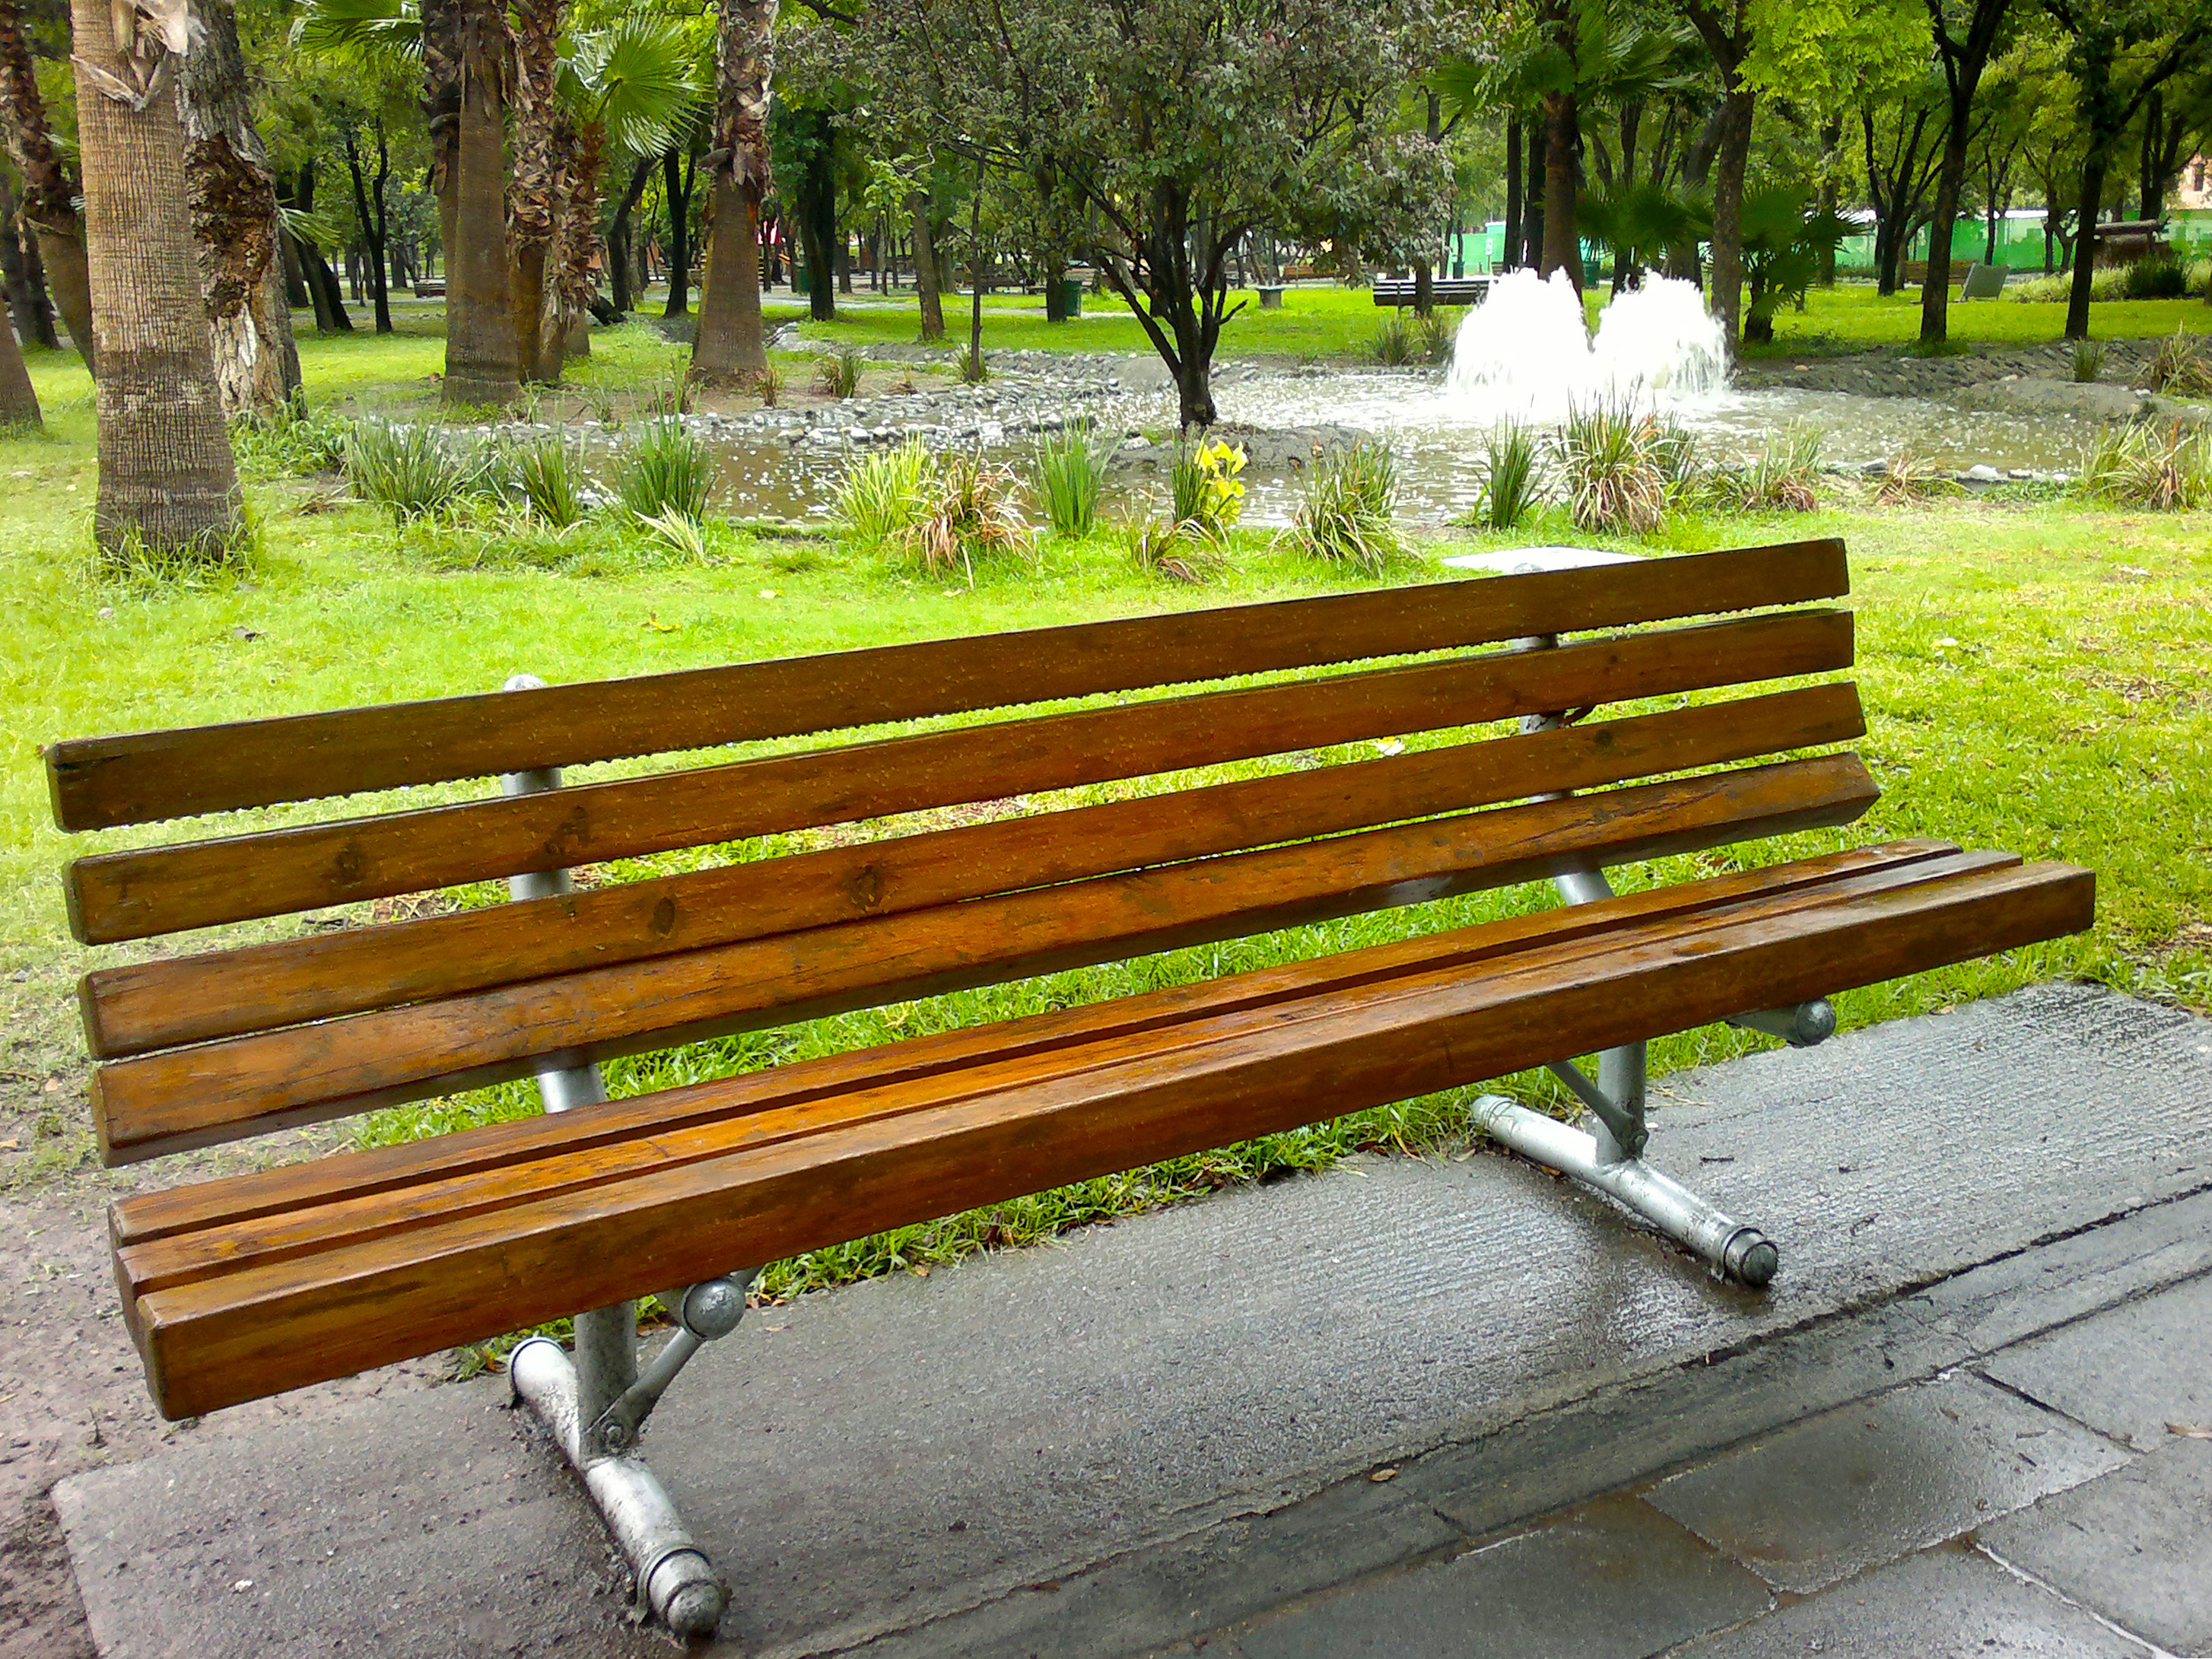 Bench in a park photo